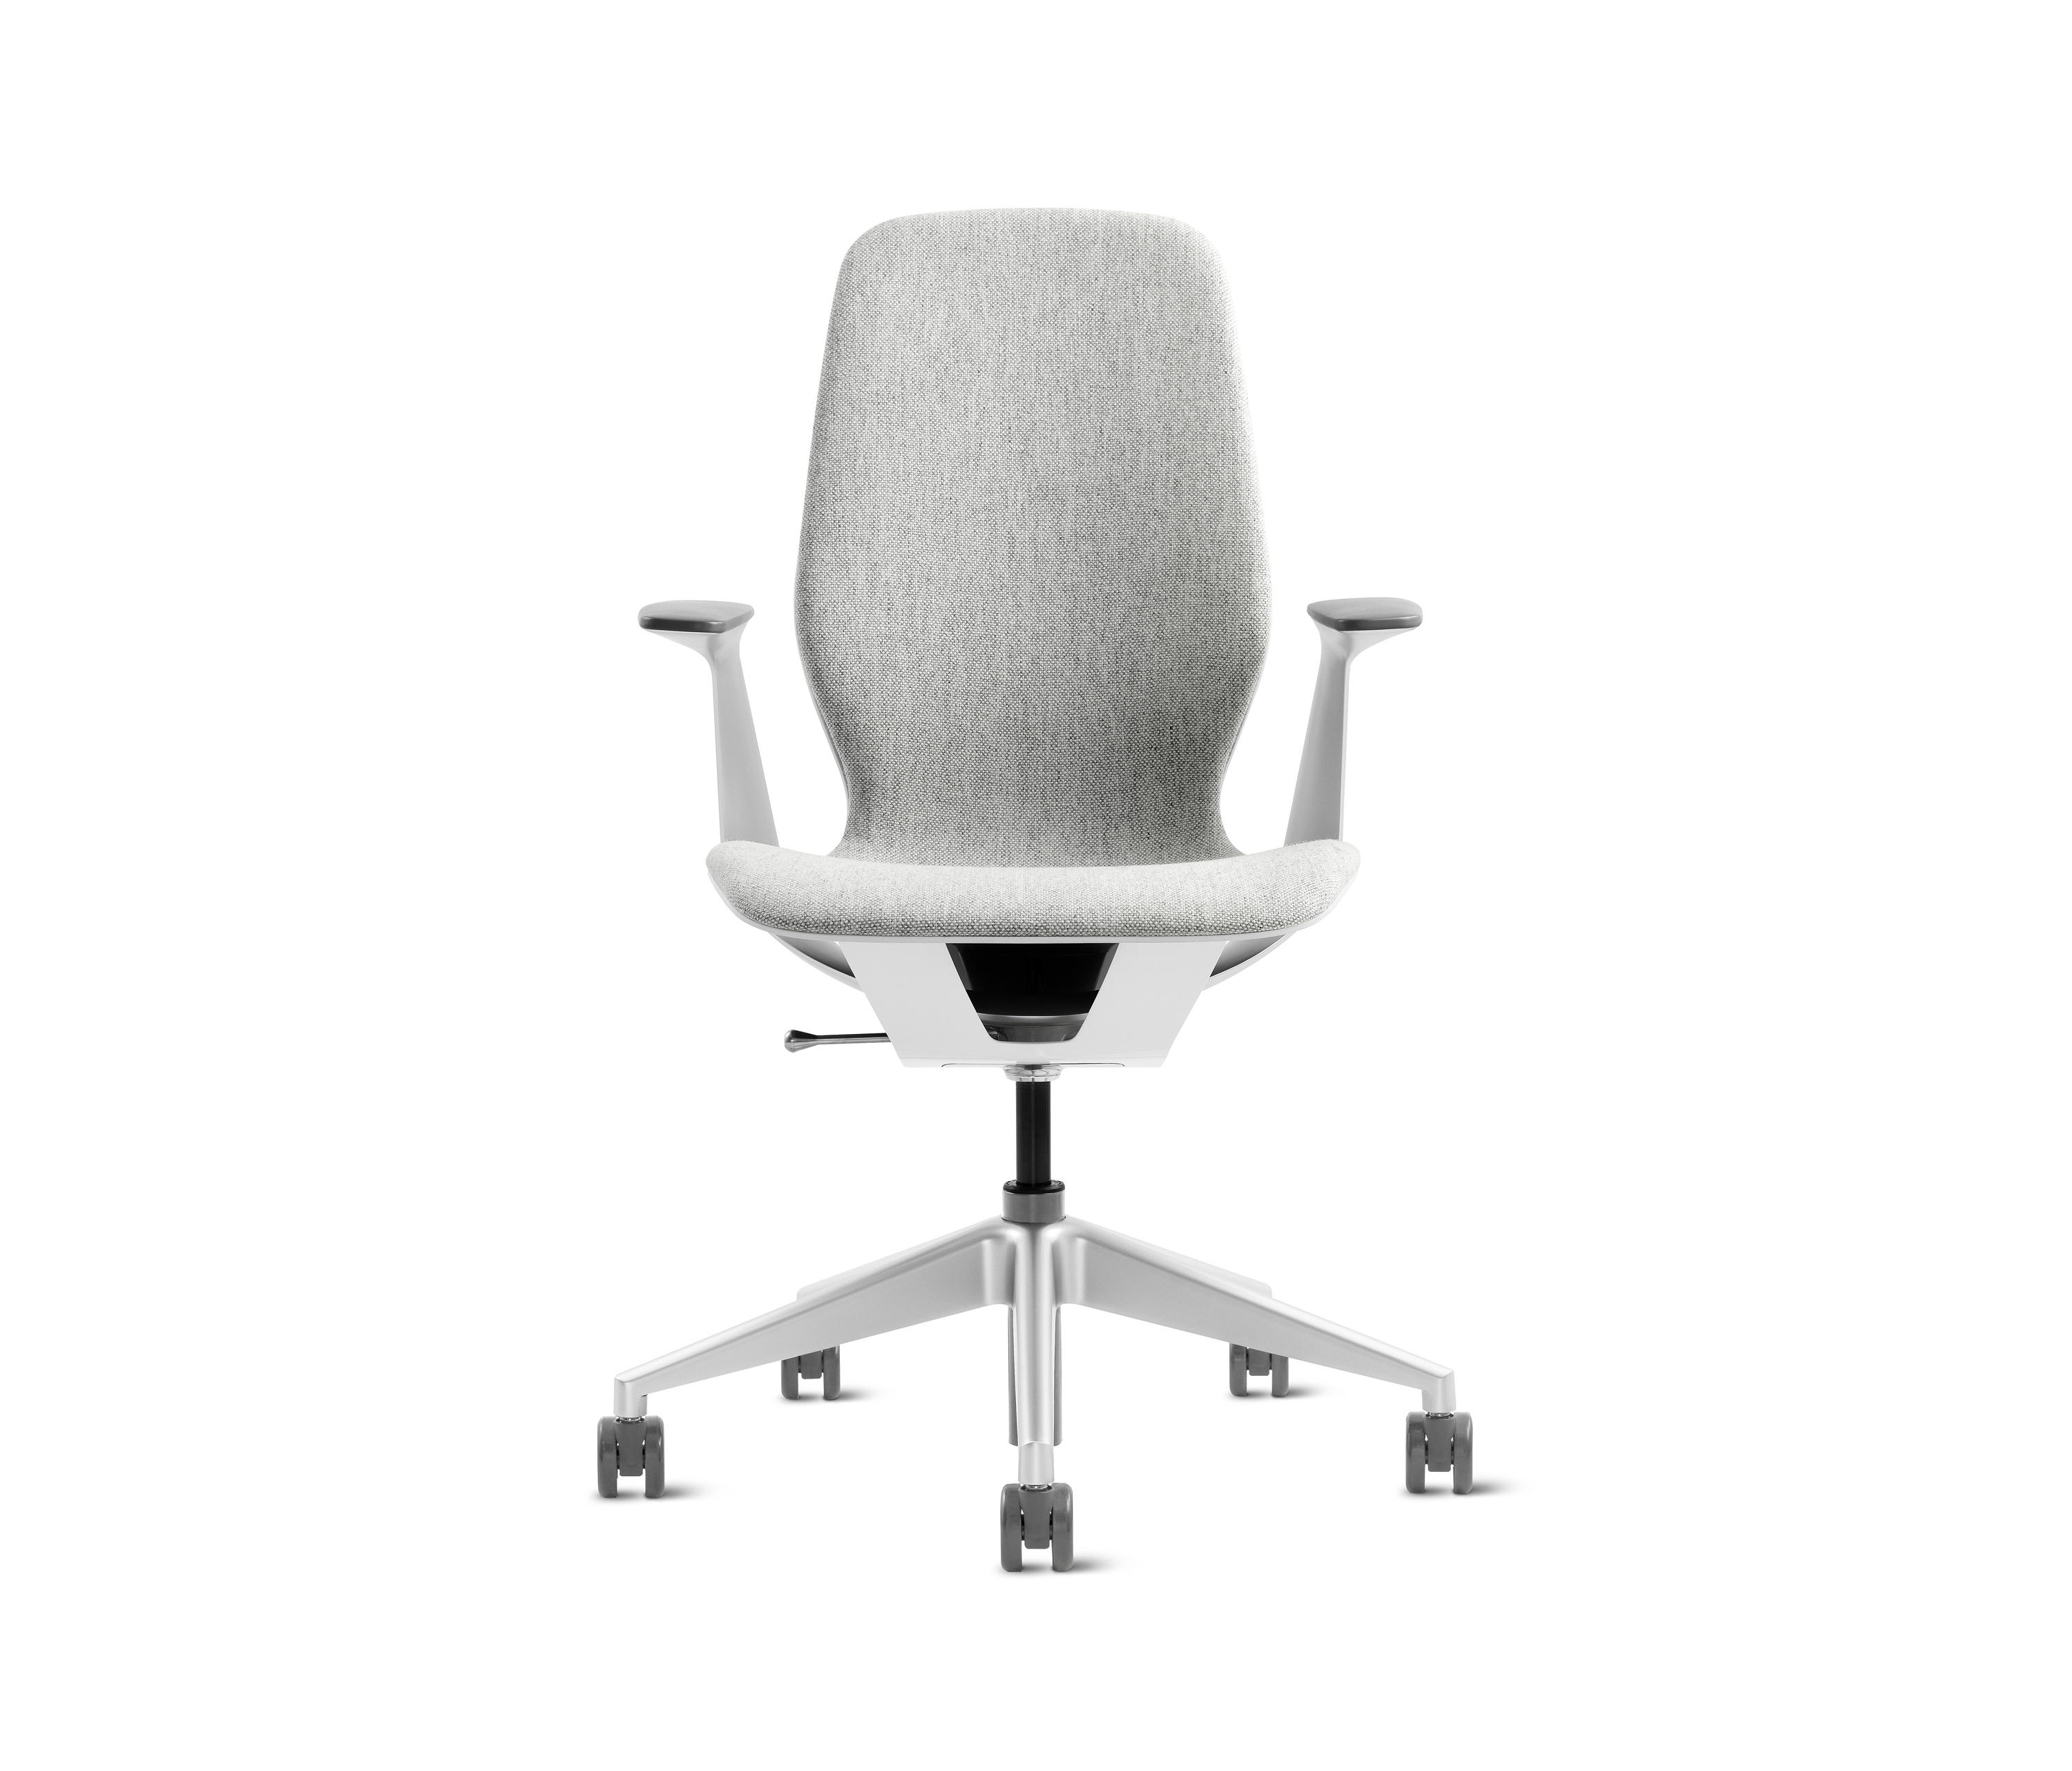 Silq Chair Office Chairs From Steelcase Architonic